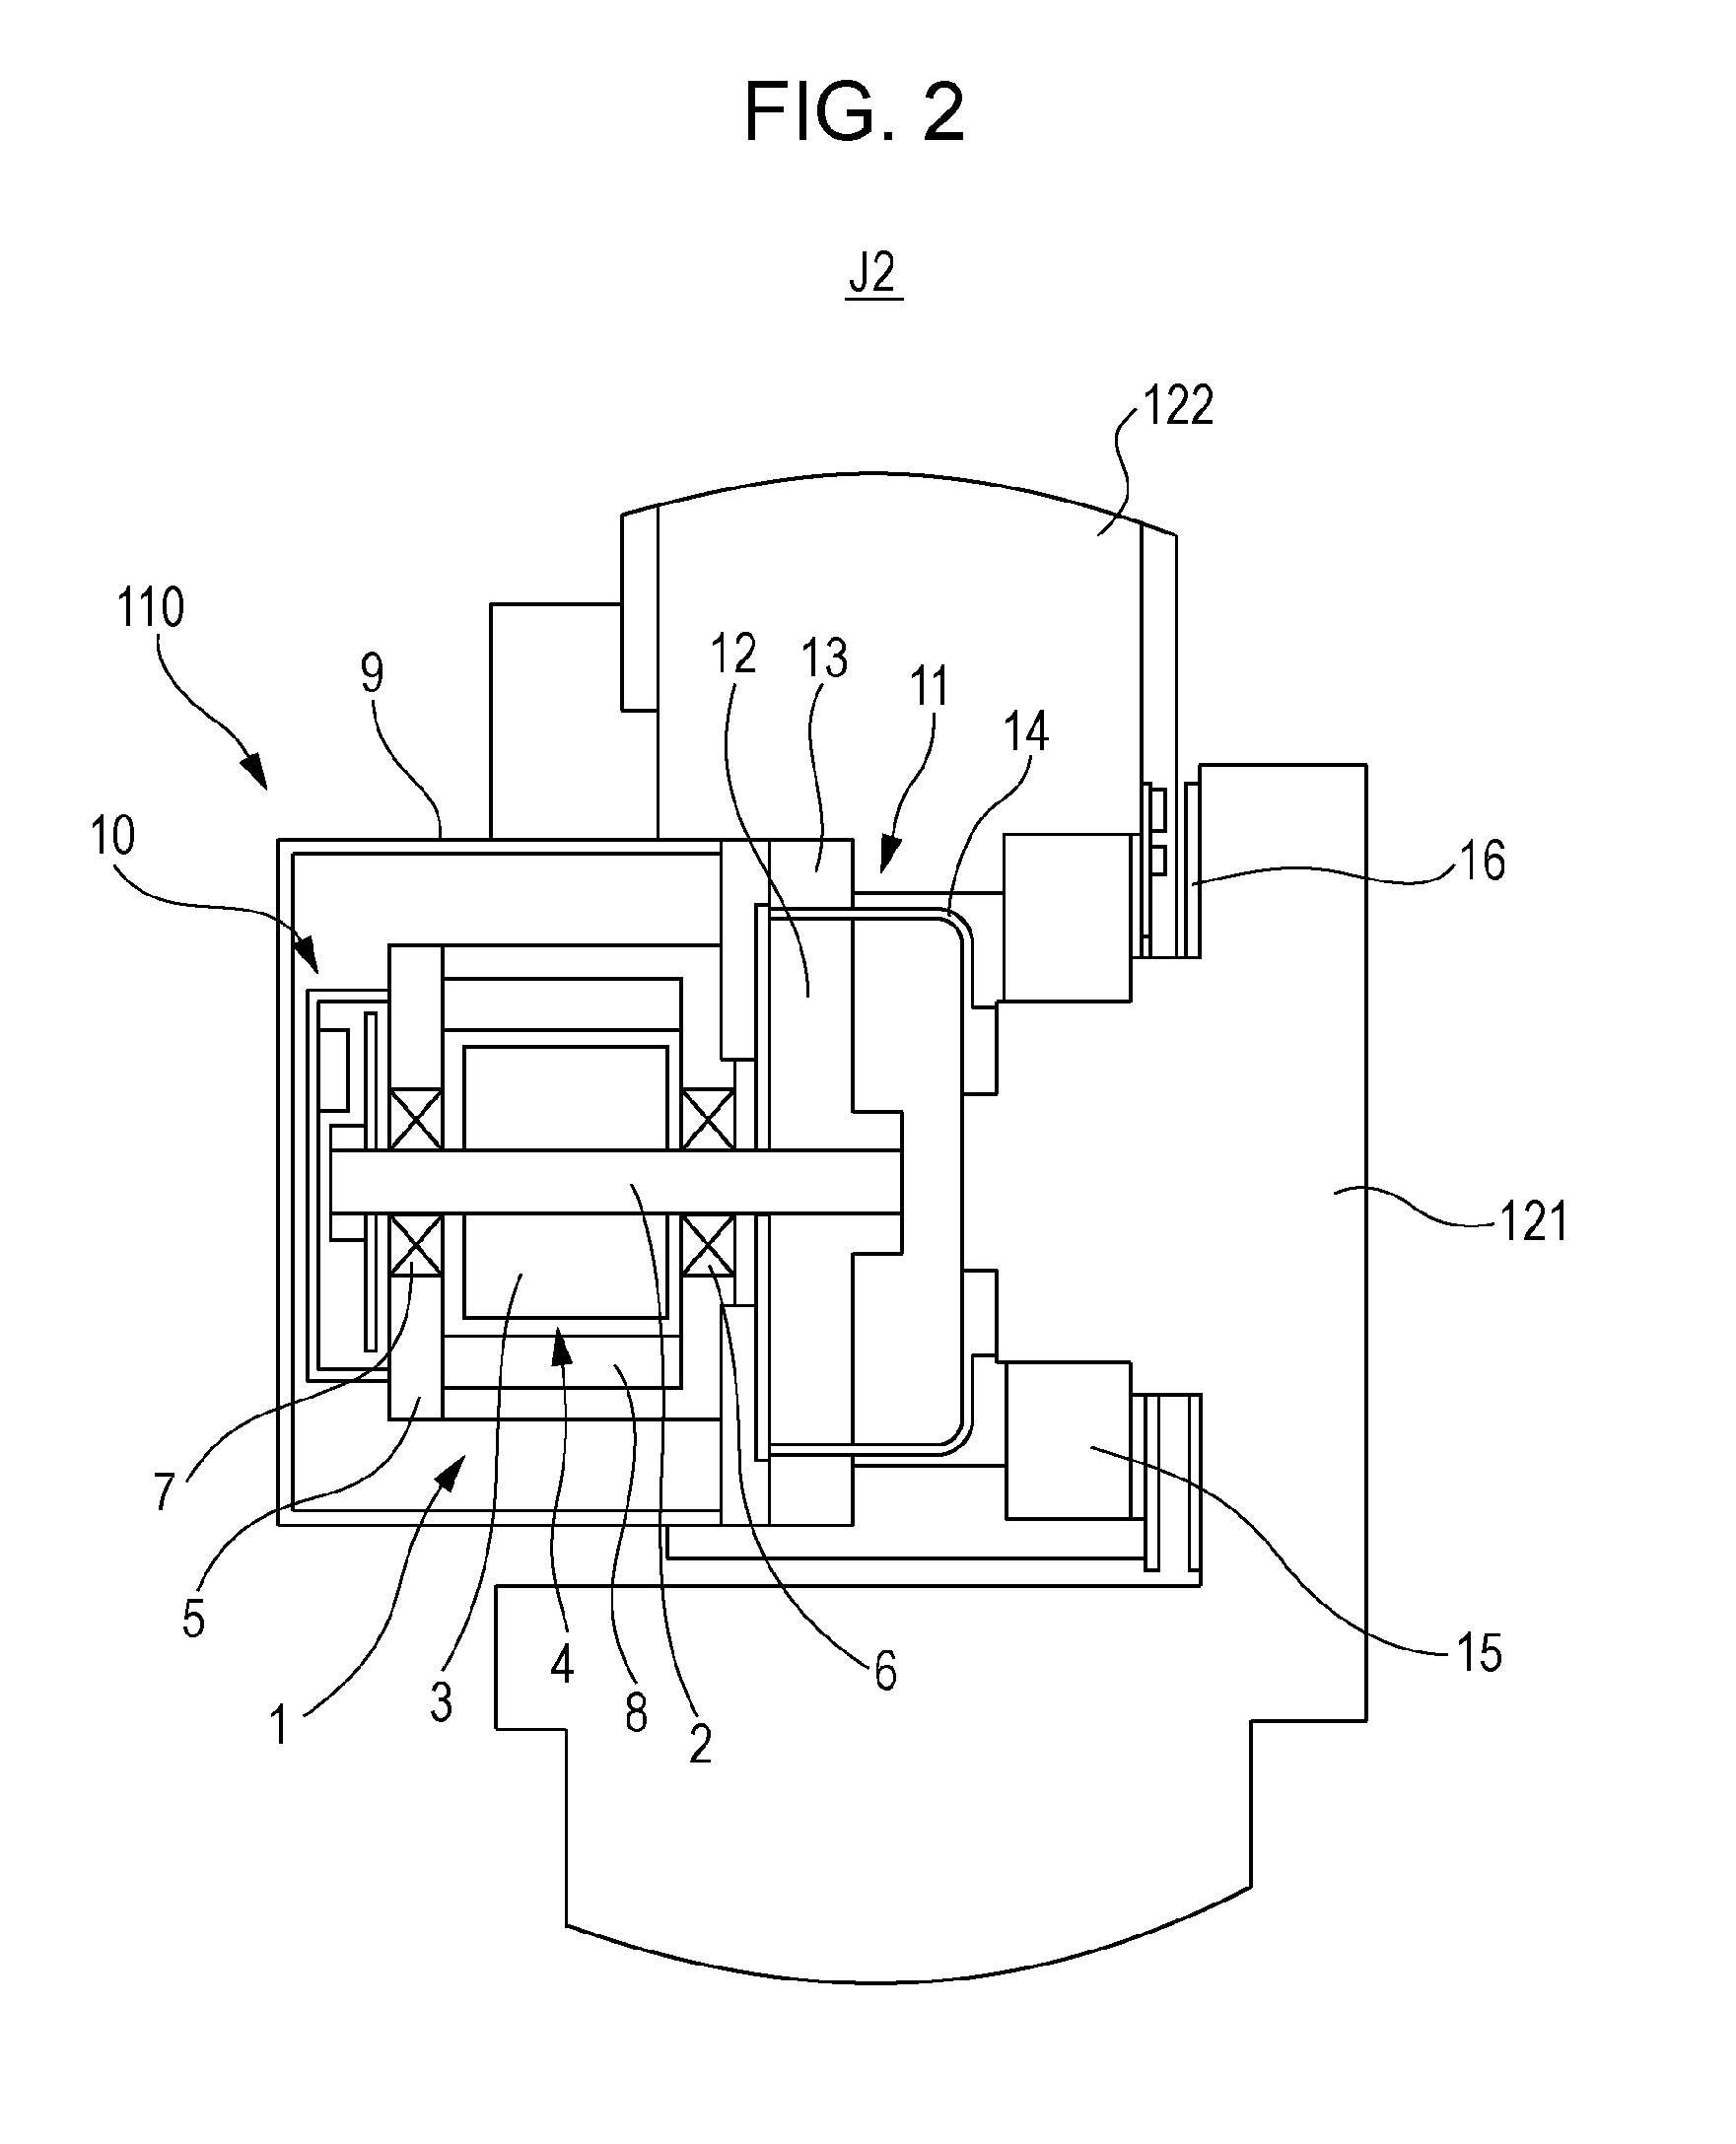 Robot controlling method, robot apparatus, program, recording medium, and method for manufacturing assembly component